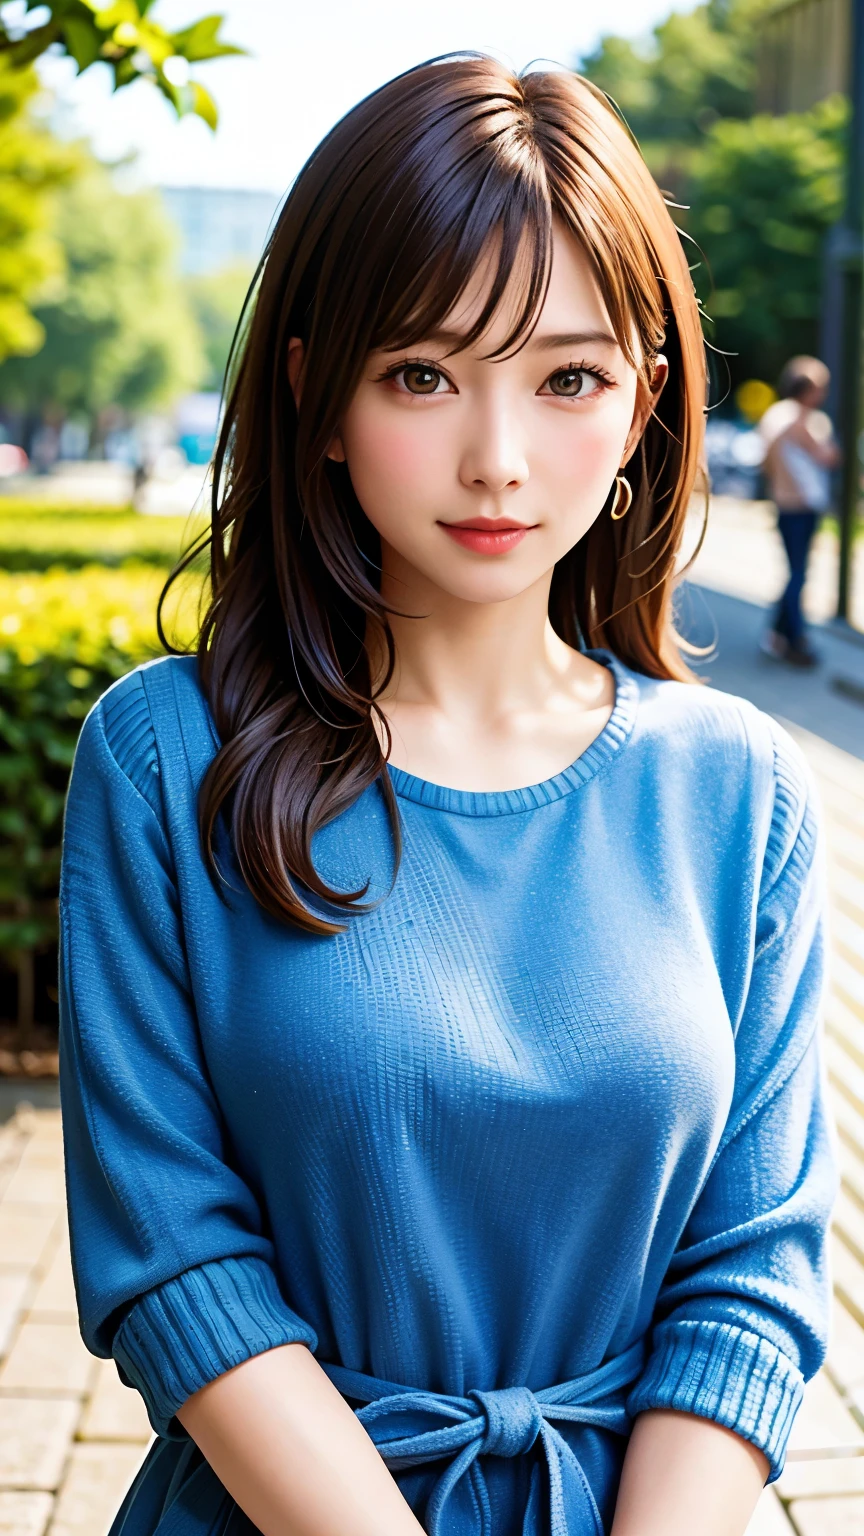 masterpiece, 最high quality, Ultra-high resolution, (Realistic:1.4), Beautiful face in every detail, High Quality Clothing, Amazing European Women, very cute, Portraiture, Soft skin and perfect face、Perfect Face, Shoot your hair, 8k resolution,Super Realistic,Very detailed,high quality, Broad perspective